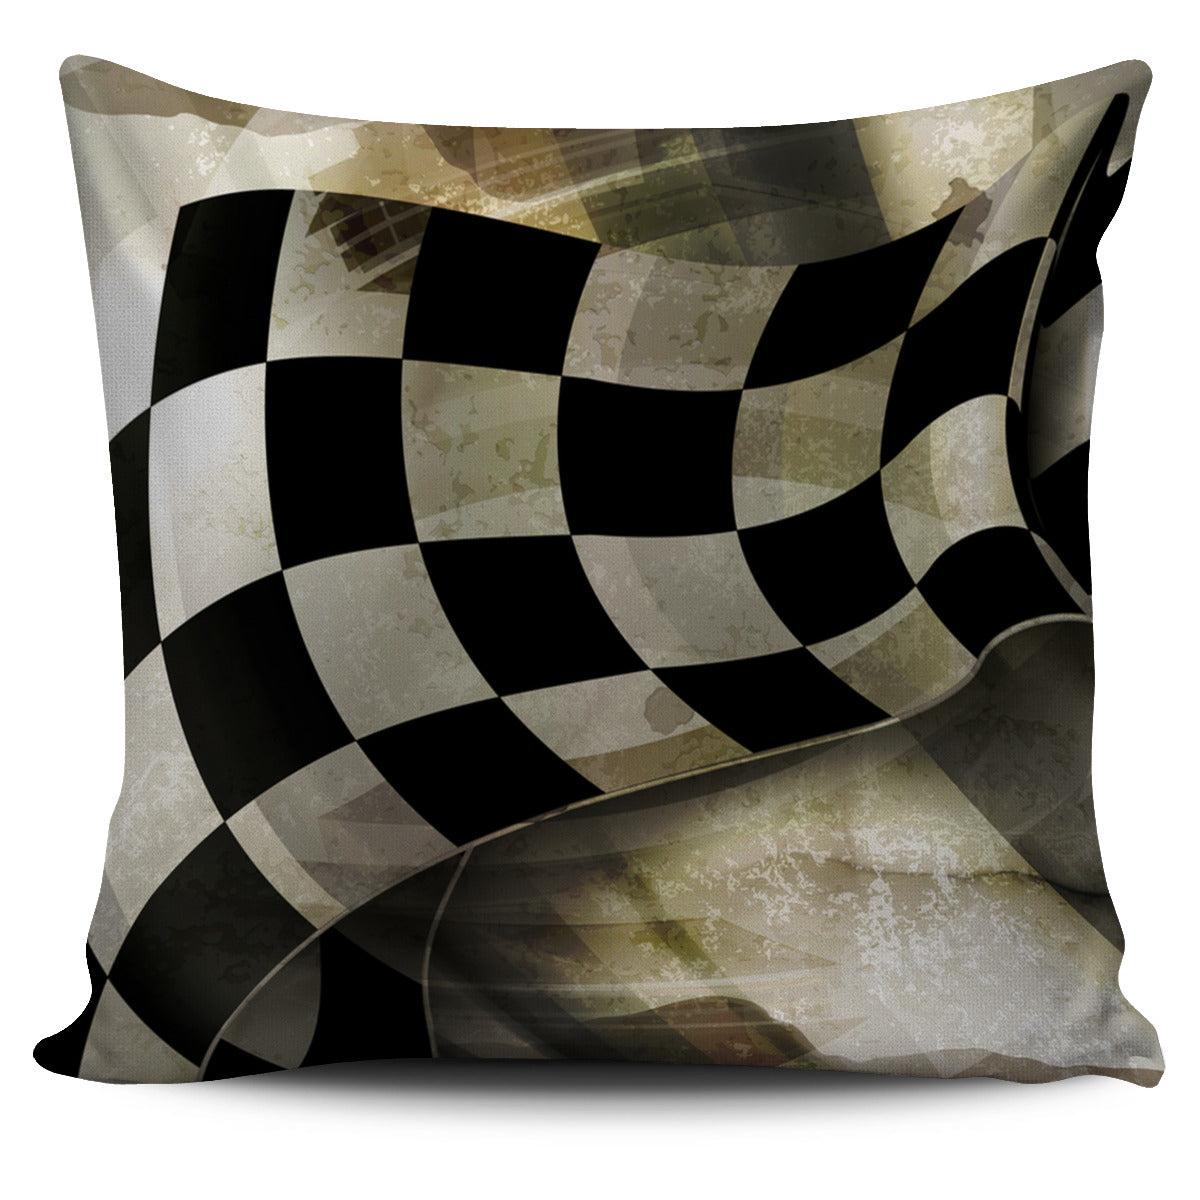 Racing Pillow Cover V2